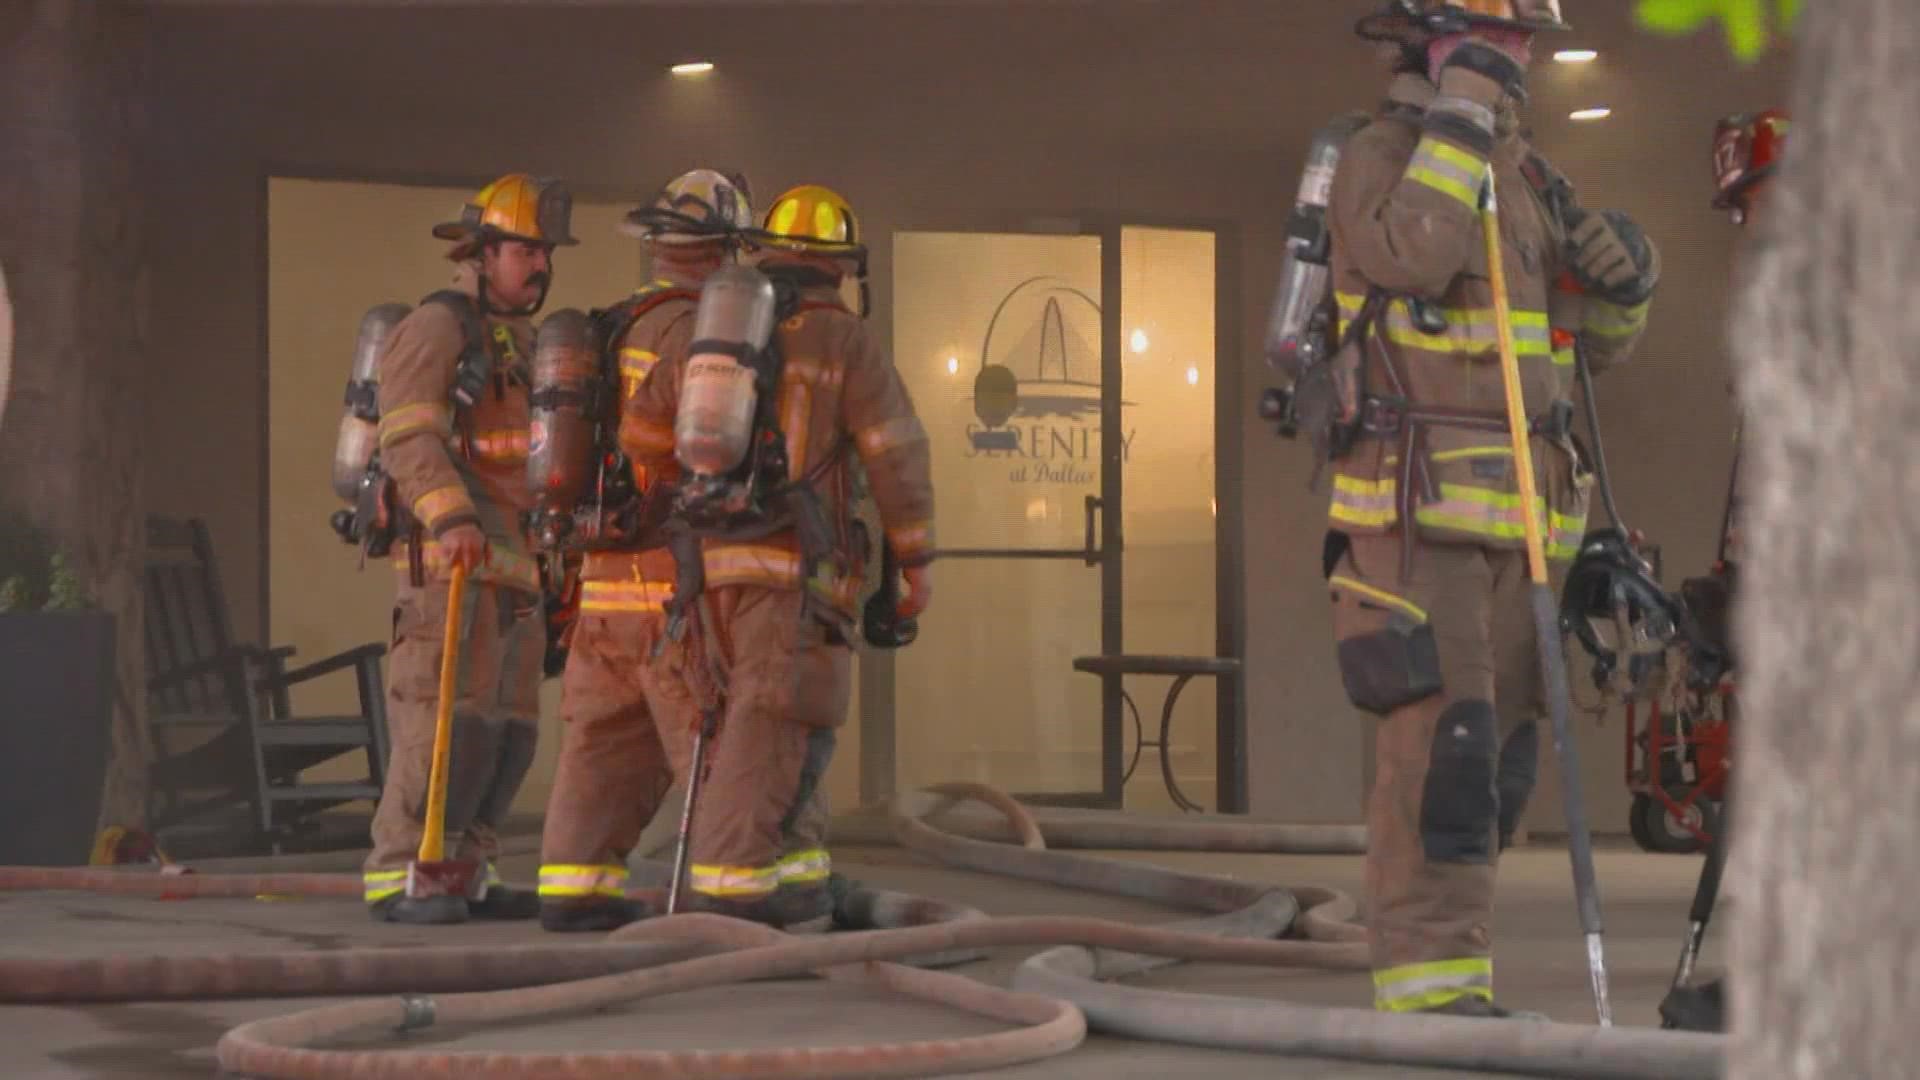 Around 65 residents were displaced after a five-alarm blaze at a 55+ senior living facility in Dallas.